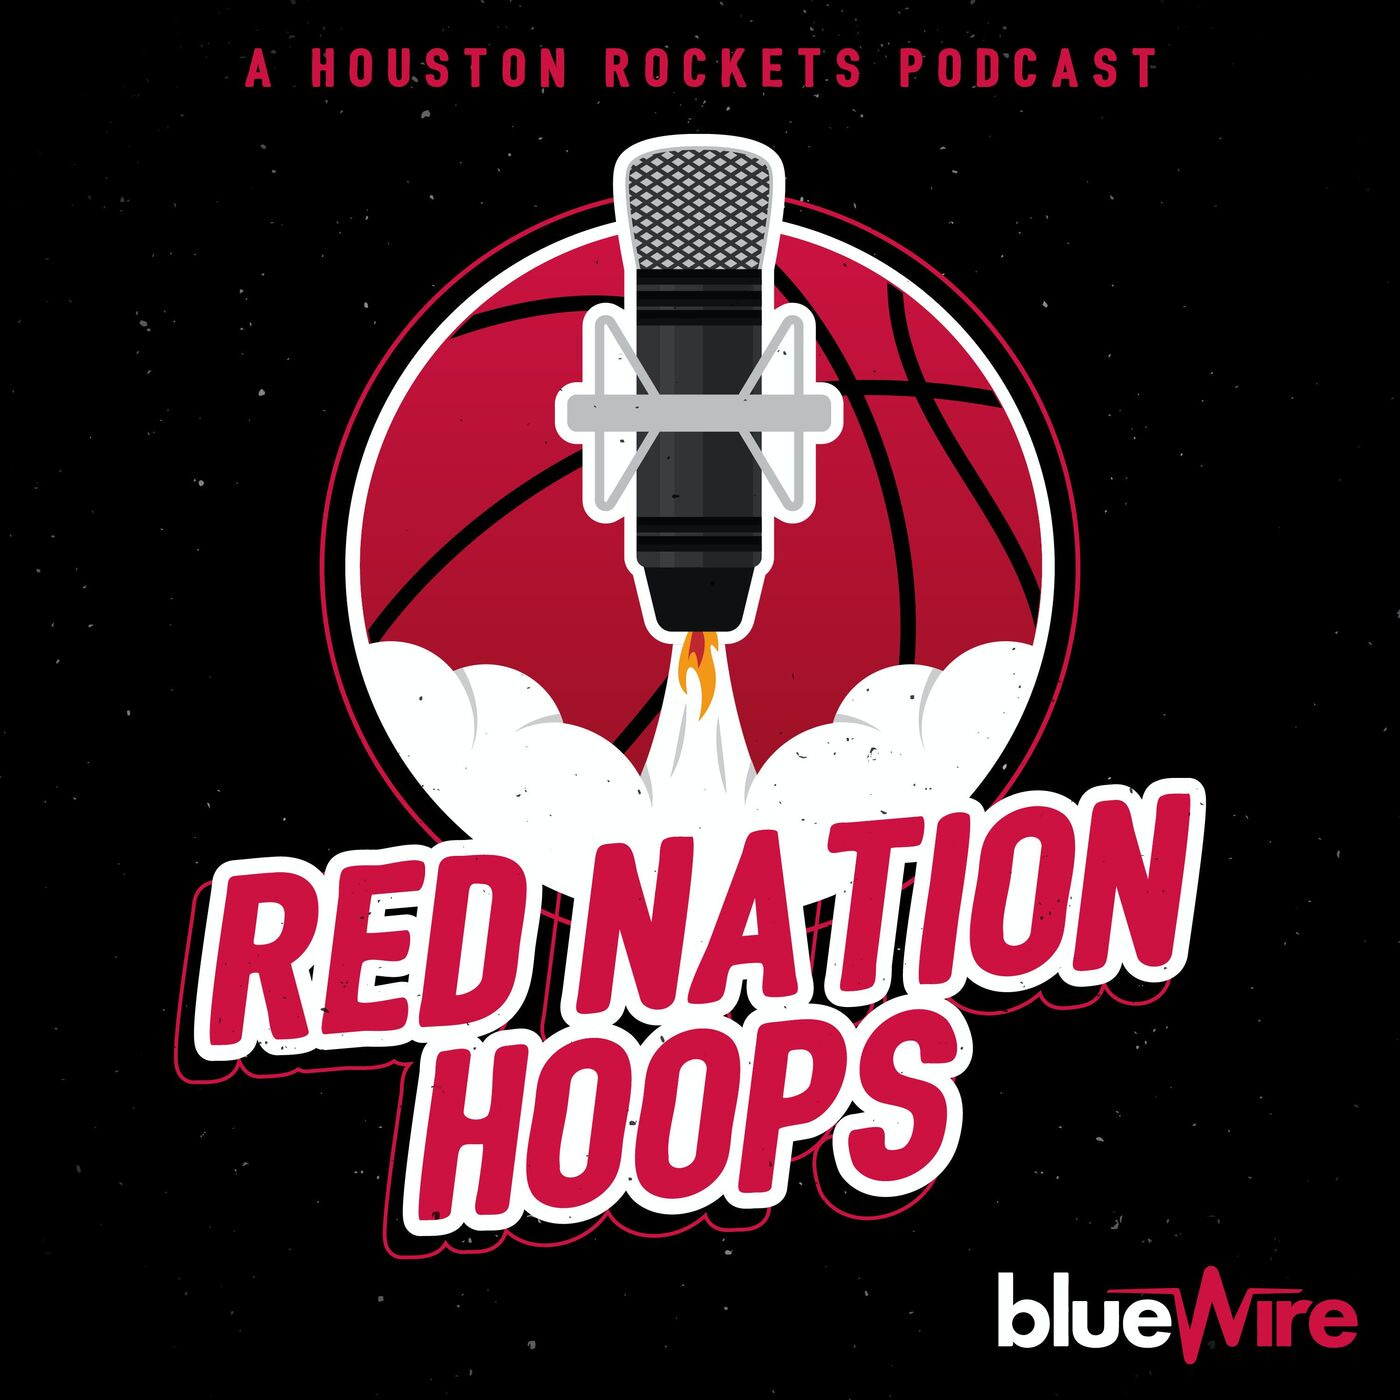 Ep: 136: Gary Clark waived, Ben McLemore starts, and more w/ Adam Spolane